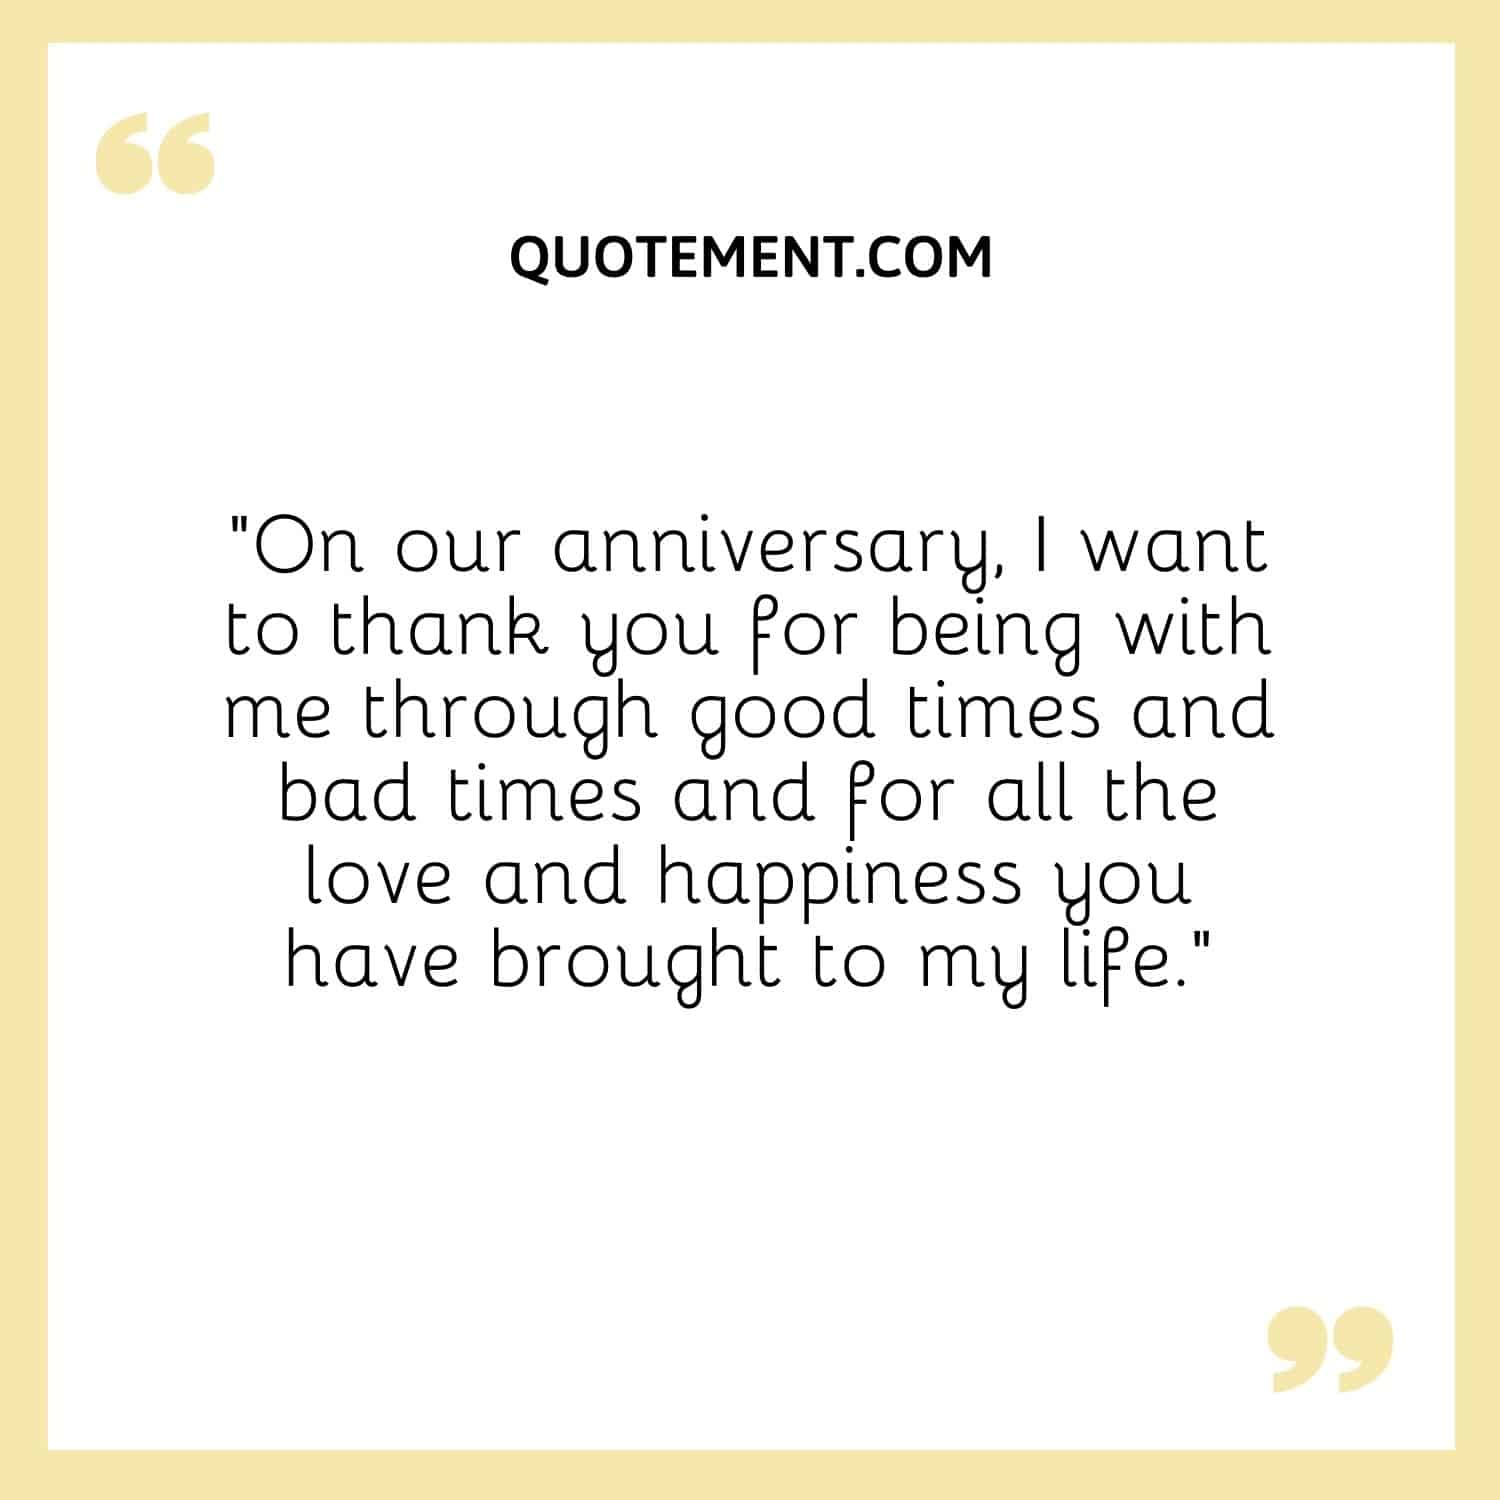 “On our anniversary, I want to thank you for being with me through good times and bad times and for all the love and happiness you have brought to my life.”